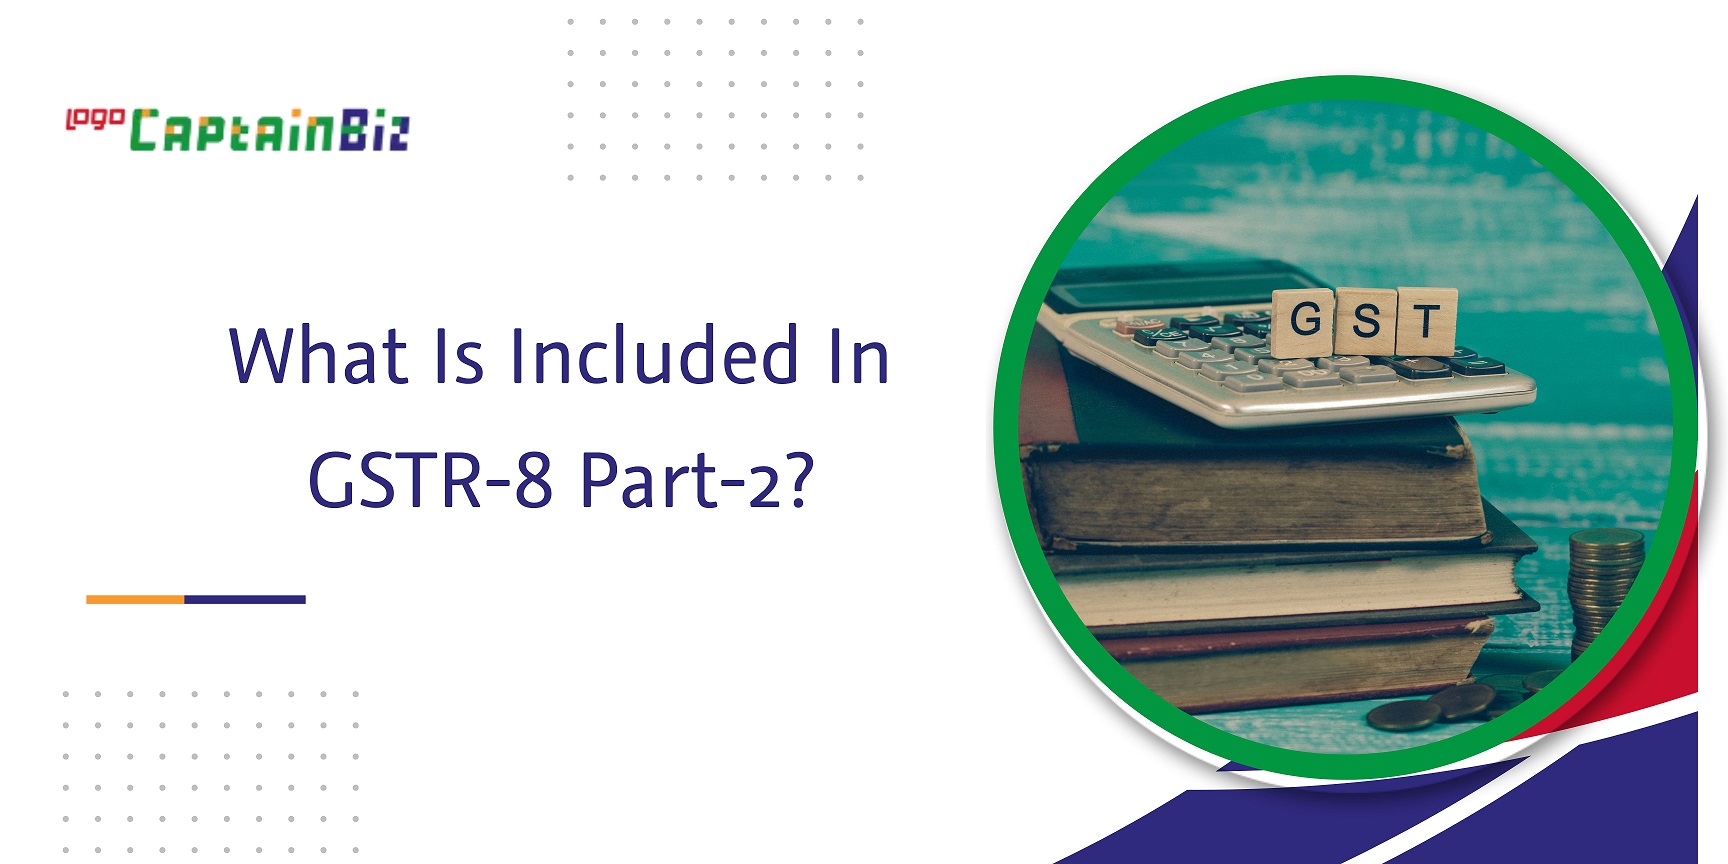 CaptainBiz: what is included in gstr-8 part 2